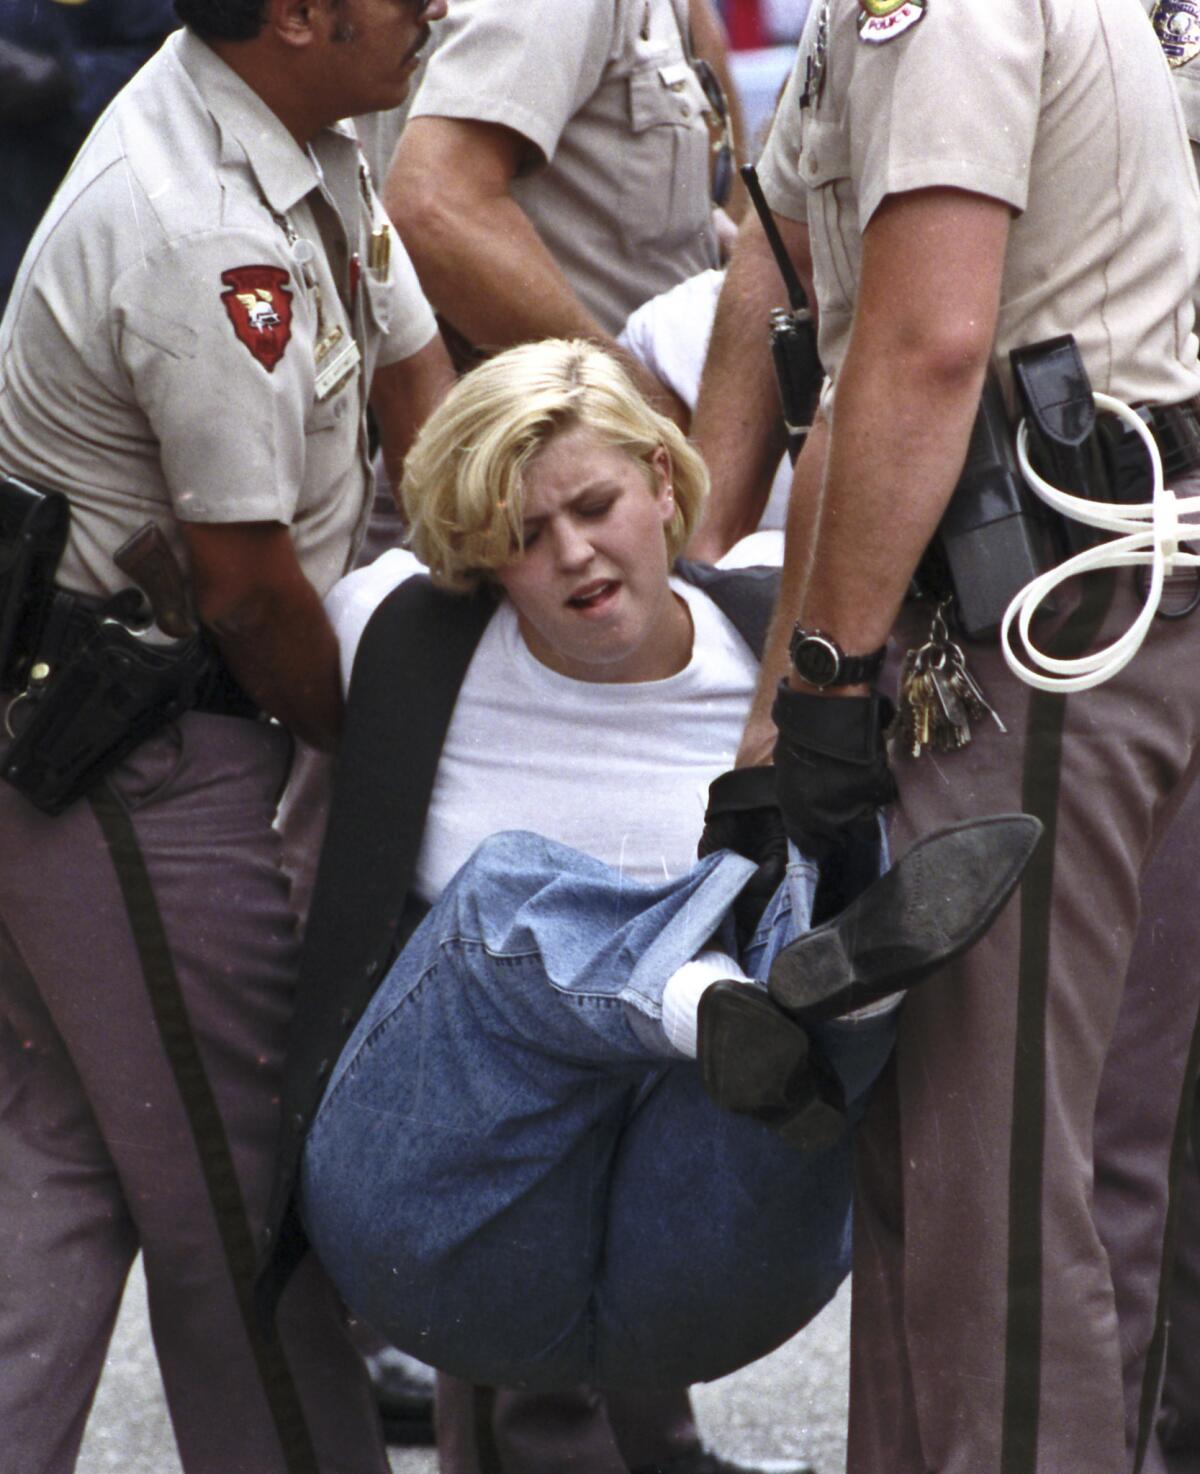 Aug. 25, 1991: Police carry away an anti-abortion protester in Wichita, Kan., during the "Summer of Mercy," when thousands of abortion opponents descended on the city, clogged streets with sit-ins, blocked clinic doors and filled the local jails. Demonstrations are planned again this summer to mark the 25th anniversary of the protests that led to nearly 2,700 arrests.